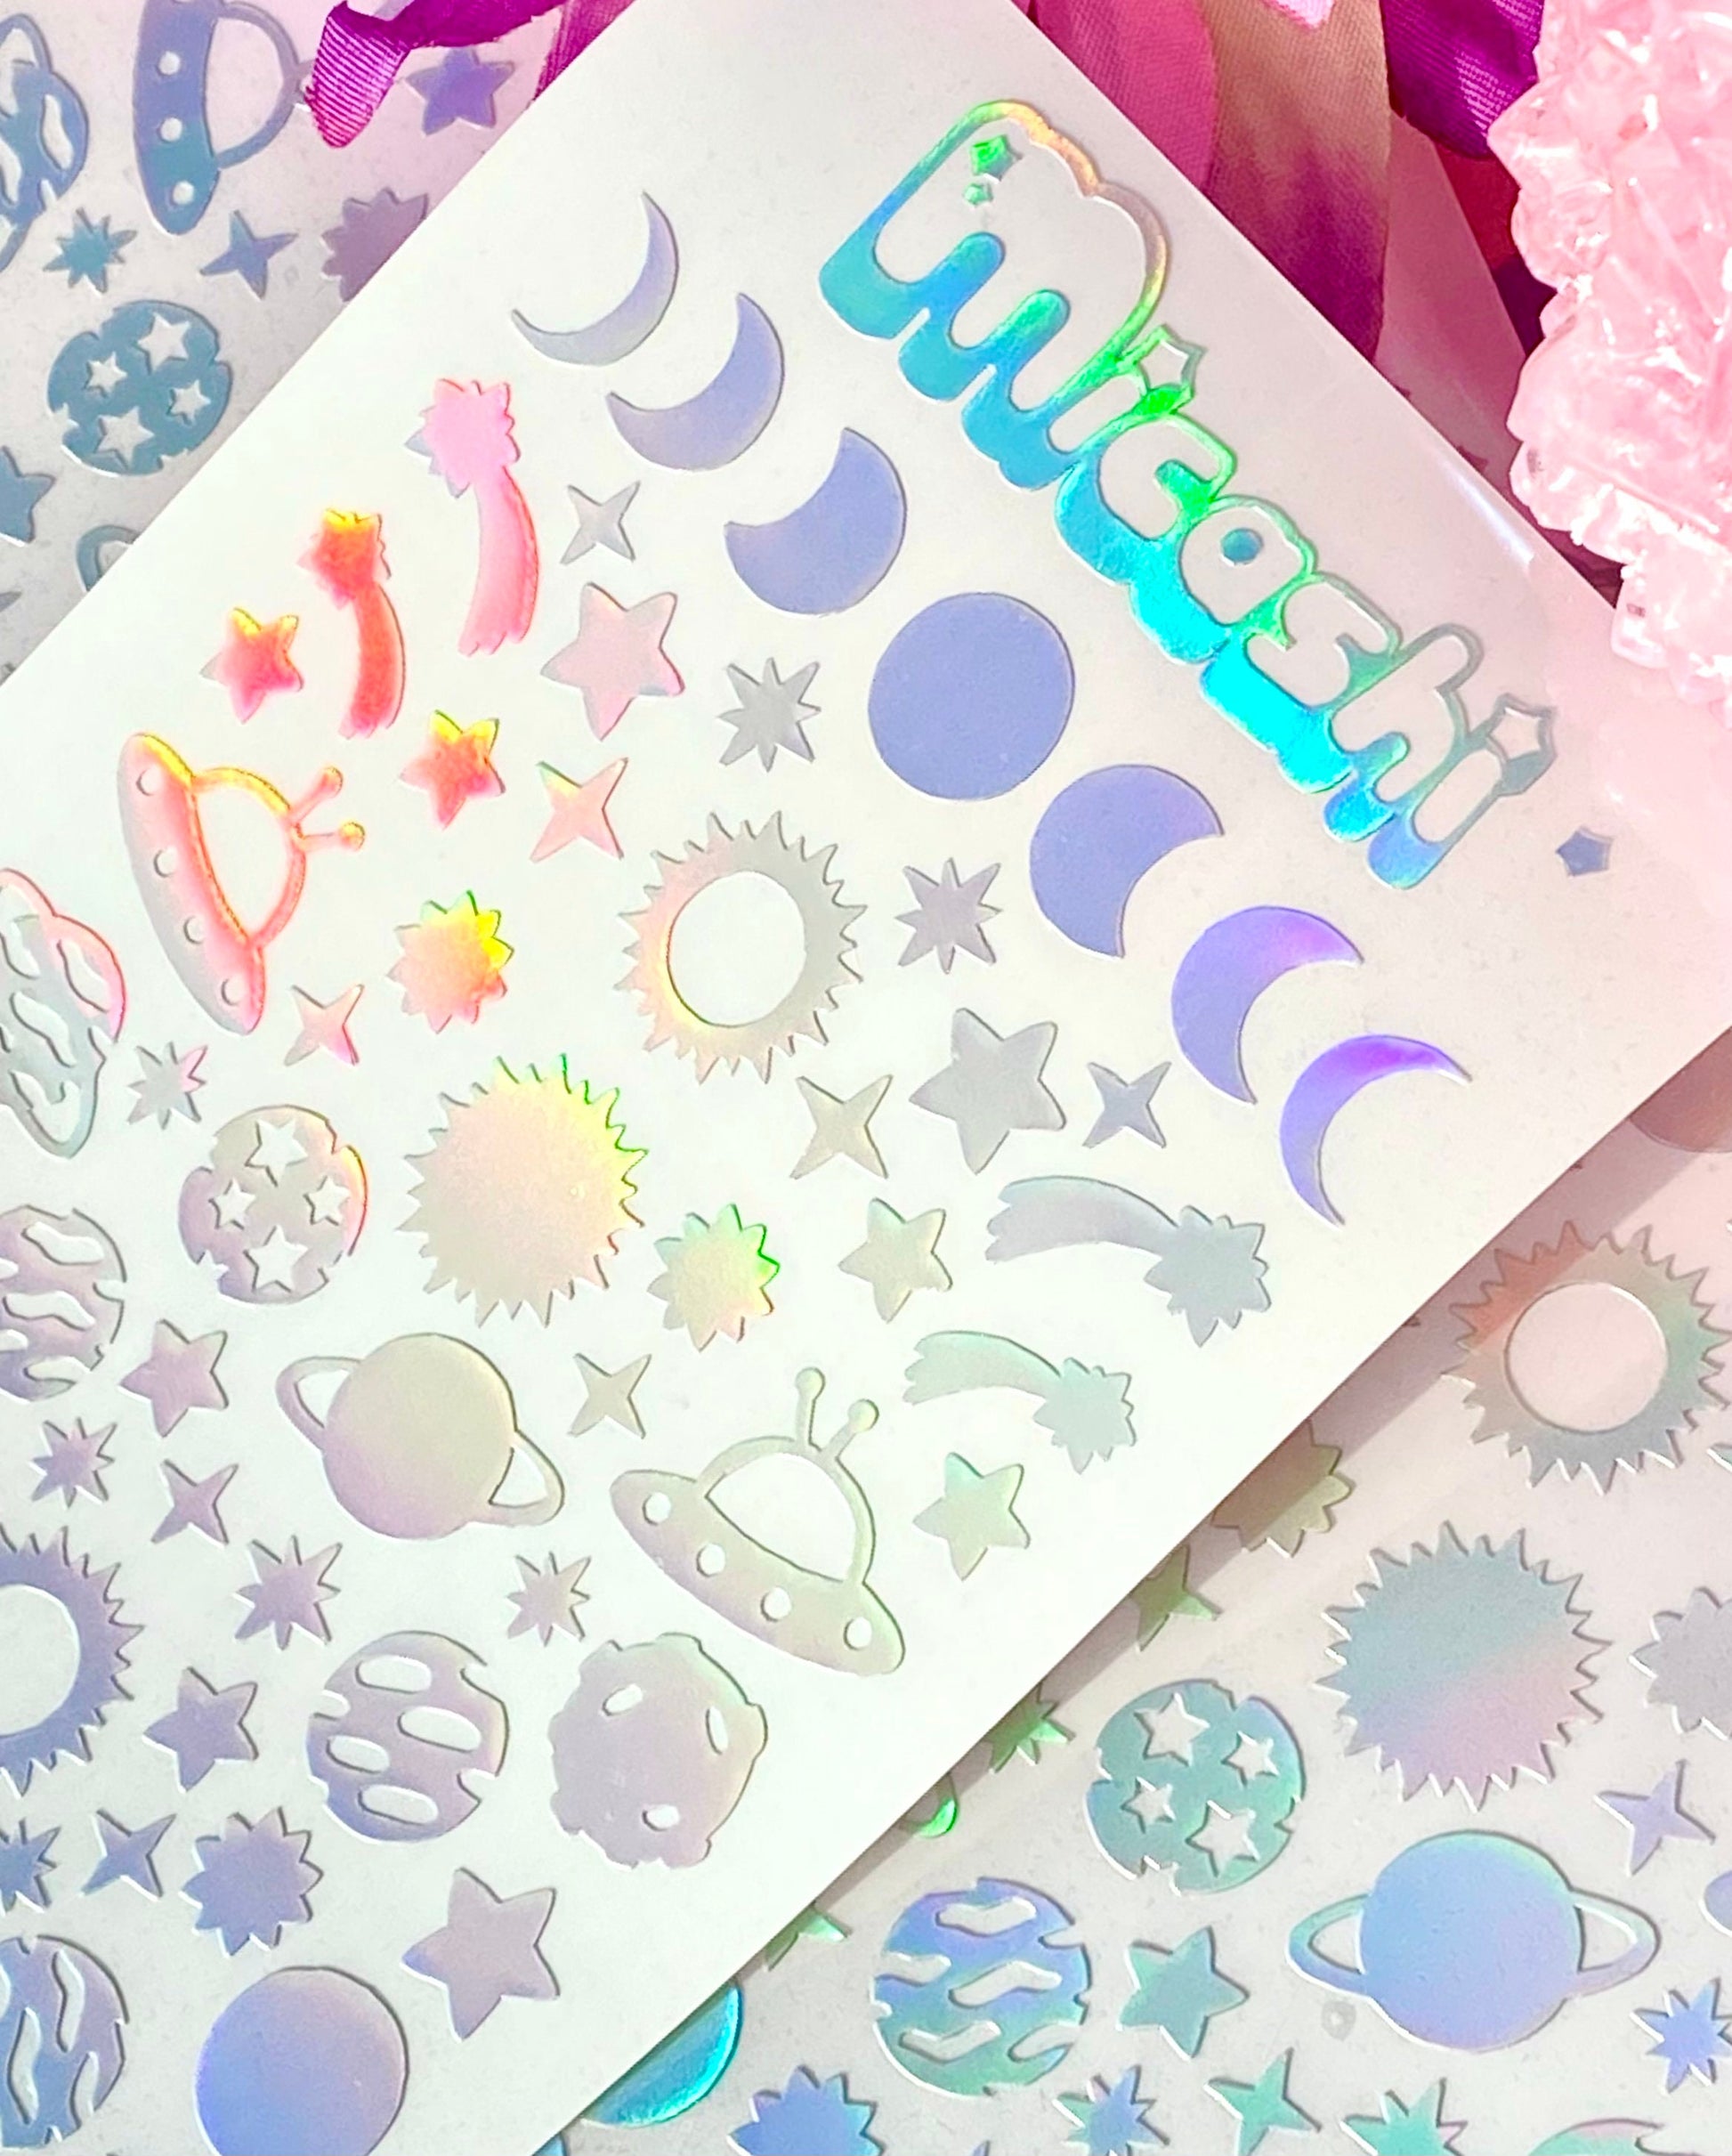 Cute Sticker Sheets Vinyl Stickers Pack Kawaii Stickers Waterproof  Holographic Polco Deco 